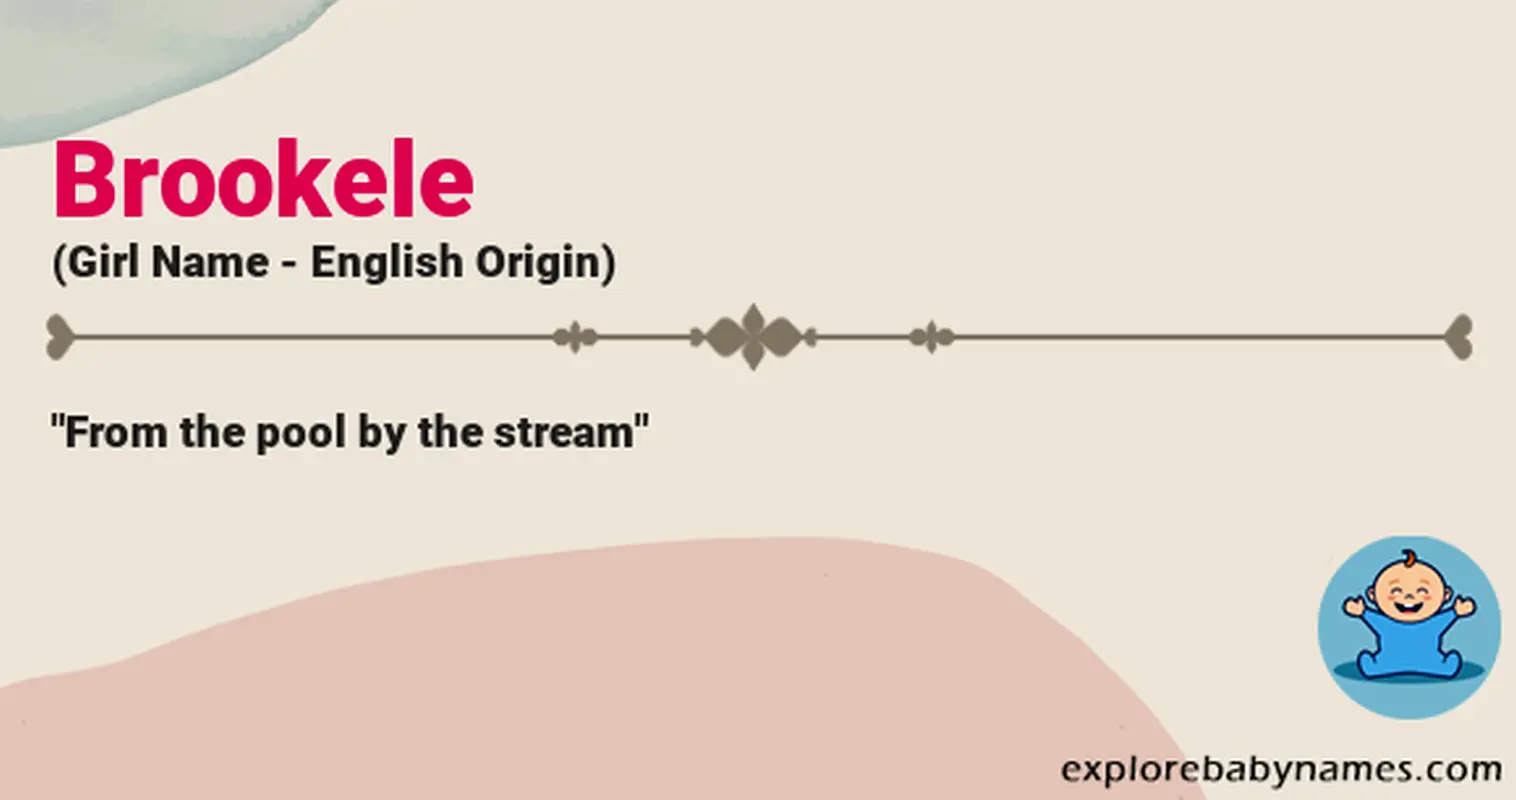 Meaning of Brookele